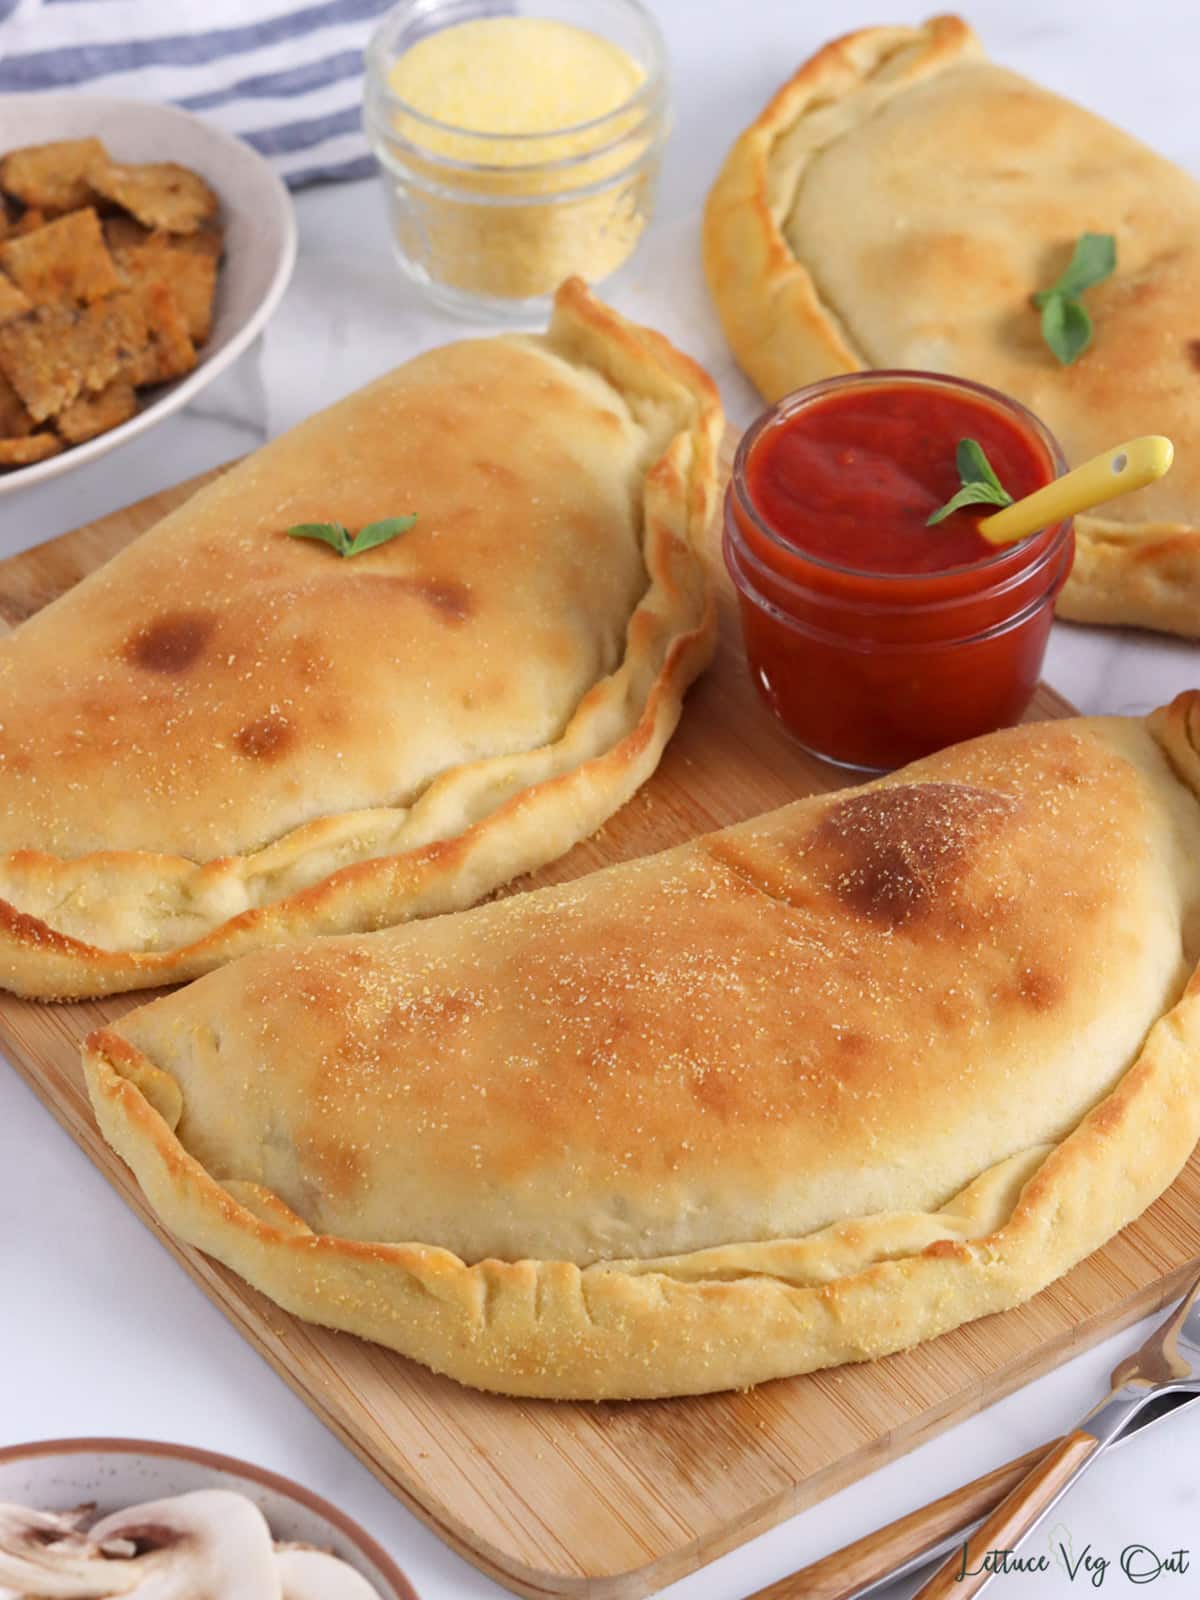 Two baked calzones on a wood board with dishes of ingredients around (tempeh, mushrooms, cornmeal, pizza sauce).